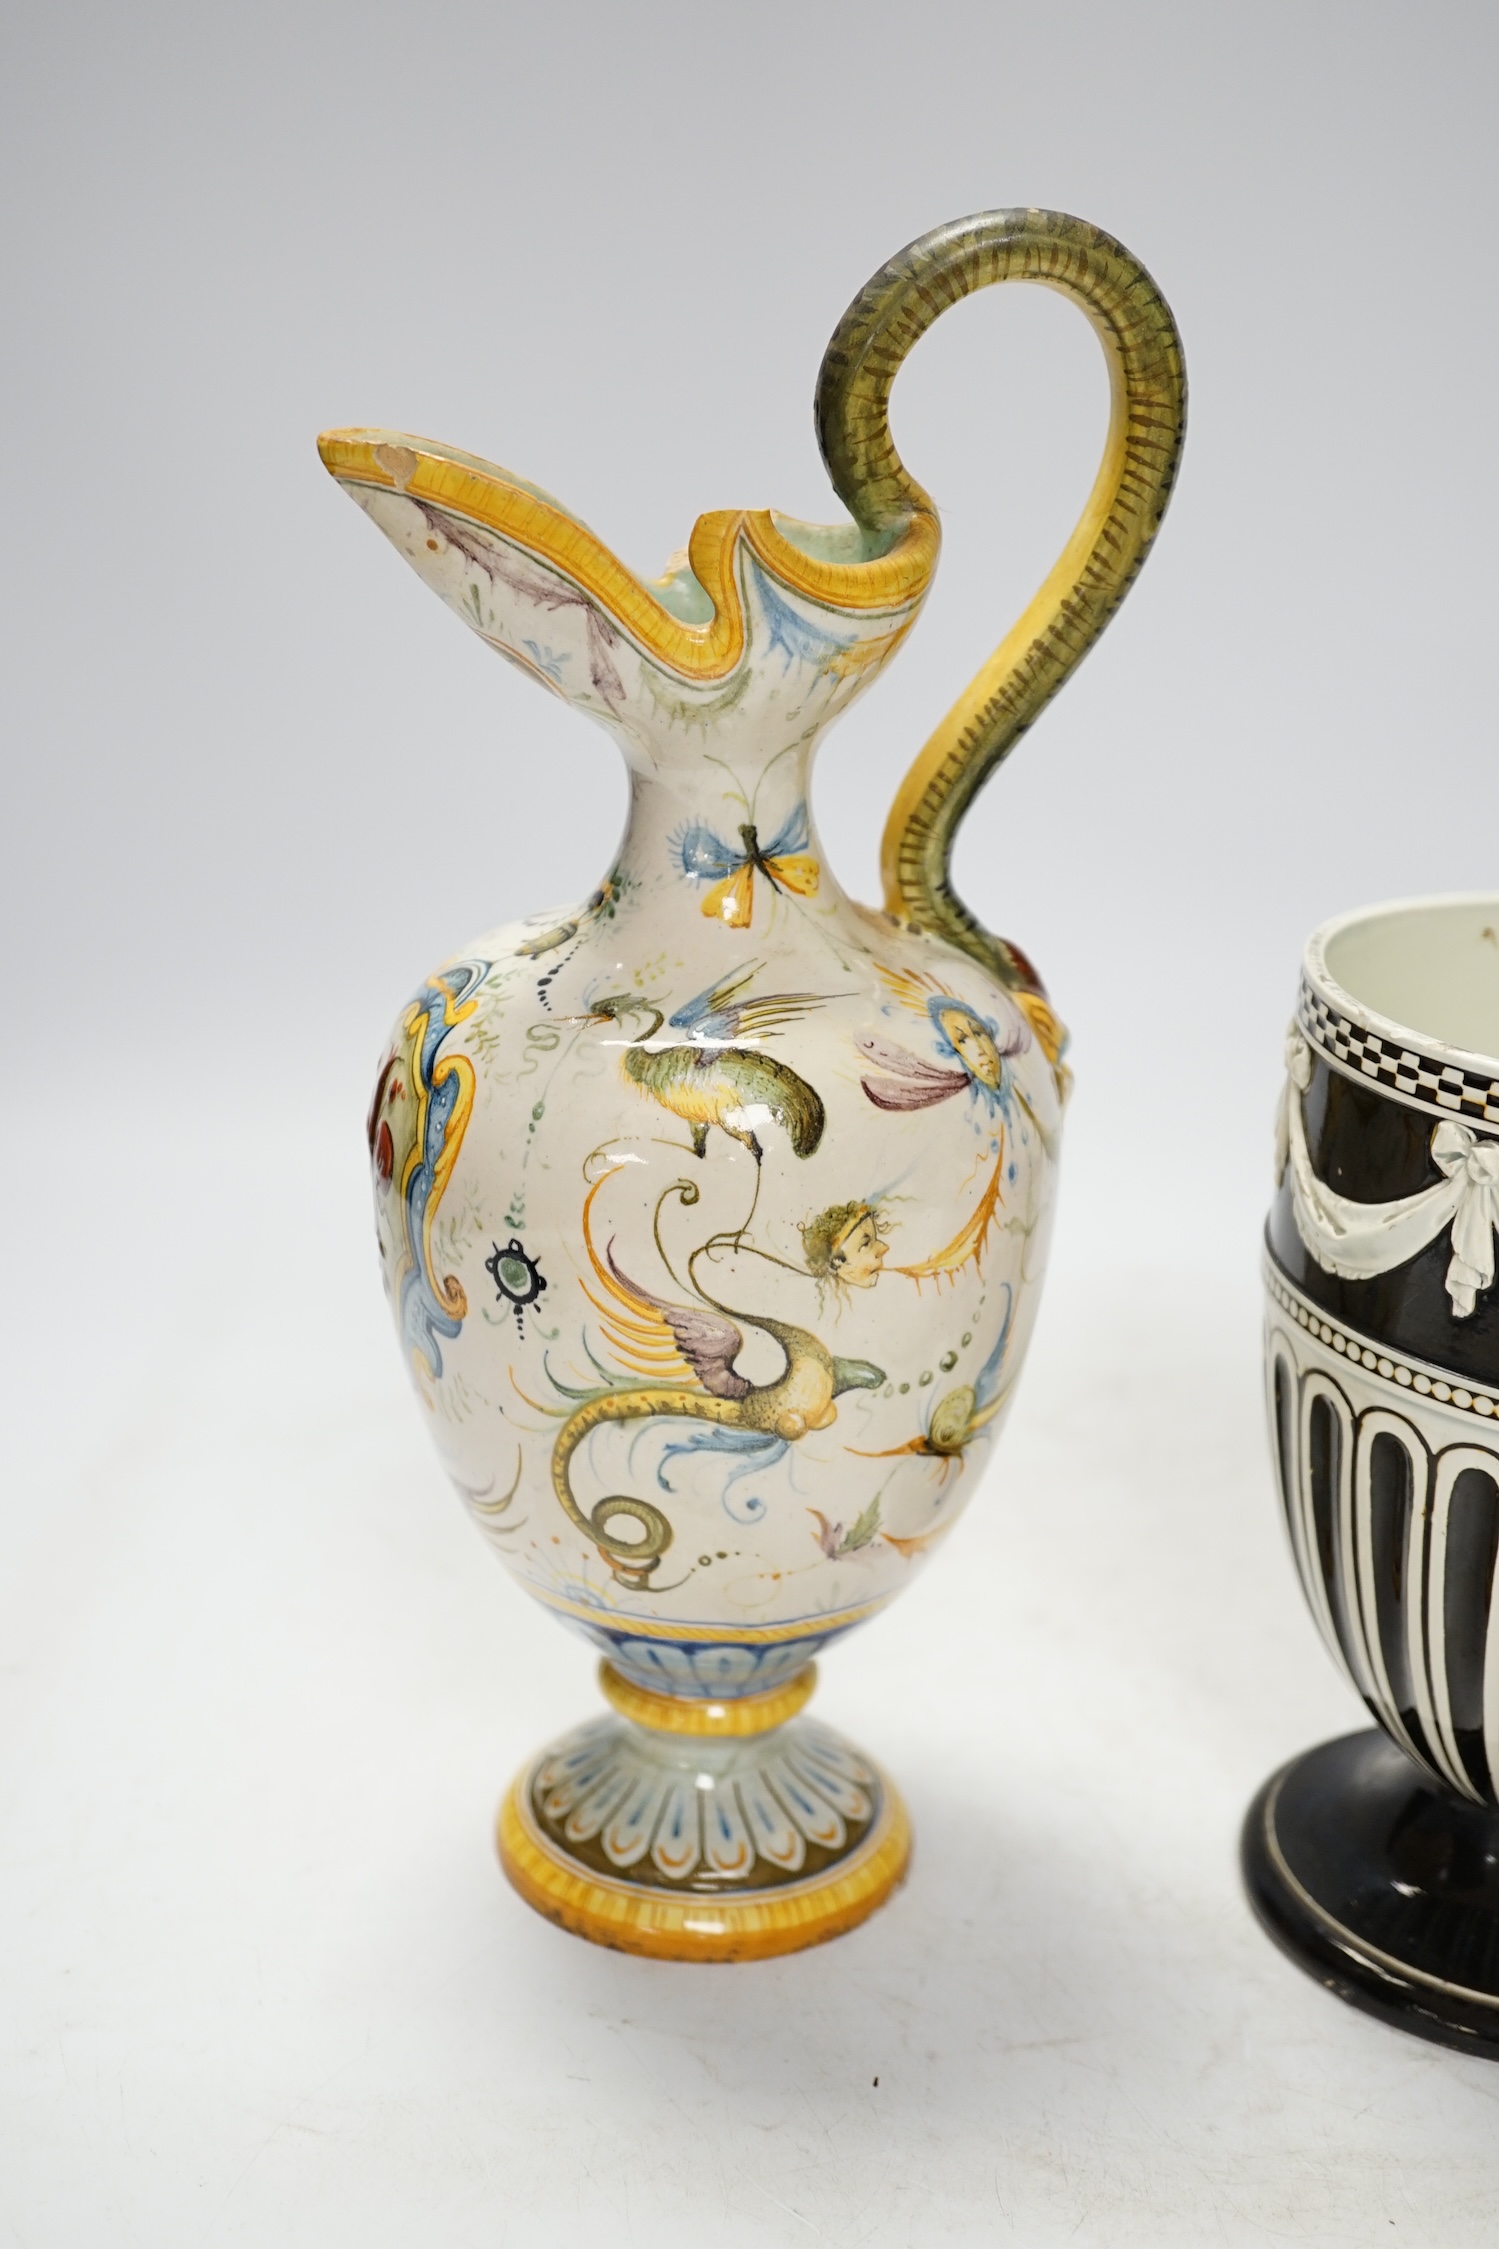 A Wedgwood pot and faience glazed jug and a Cantagalli maiolica pearl glazed jug, 26cm. Condition - poor, losses to upper rim of Cantagalli jug and restoration to base of Wedgwood